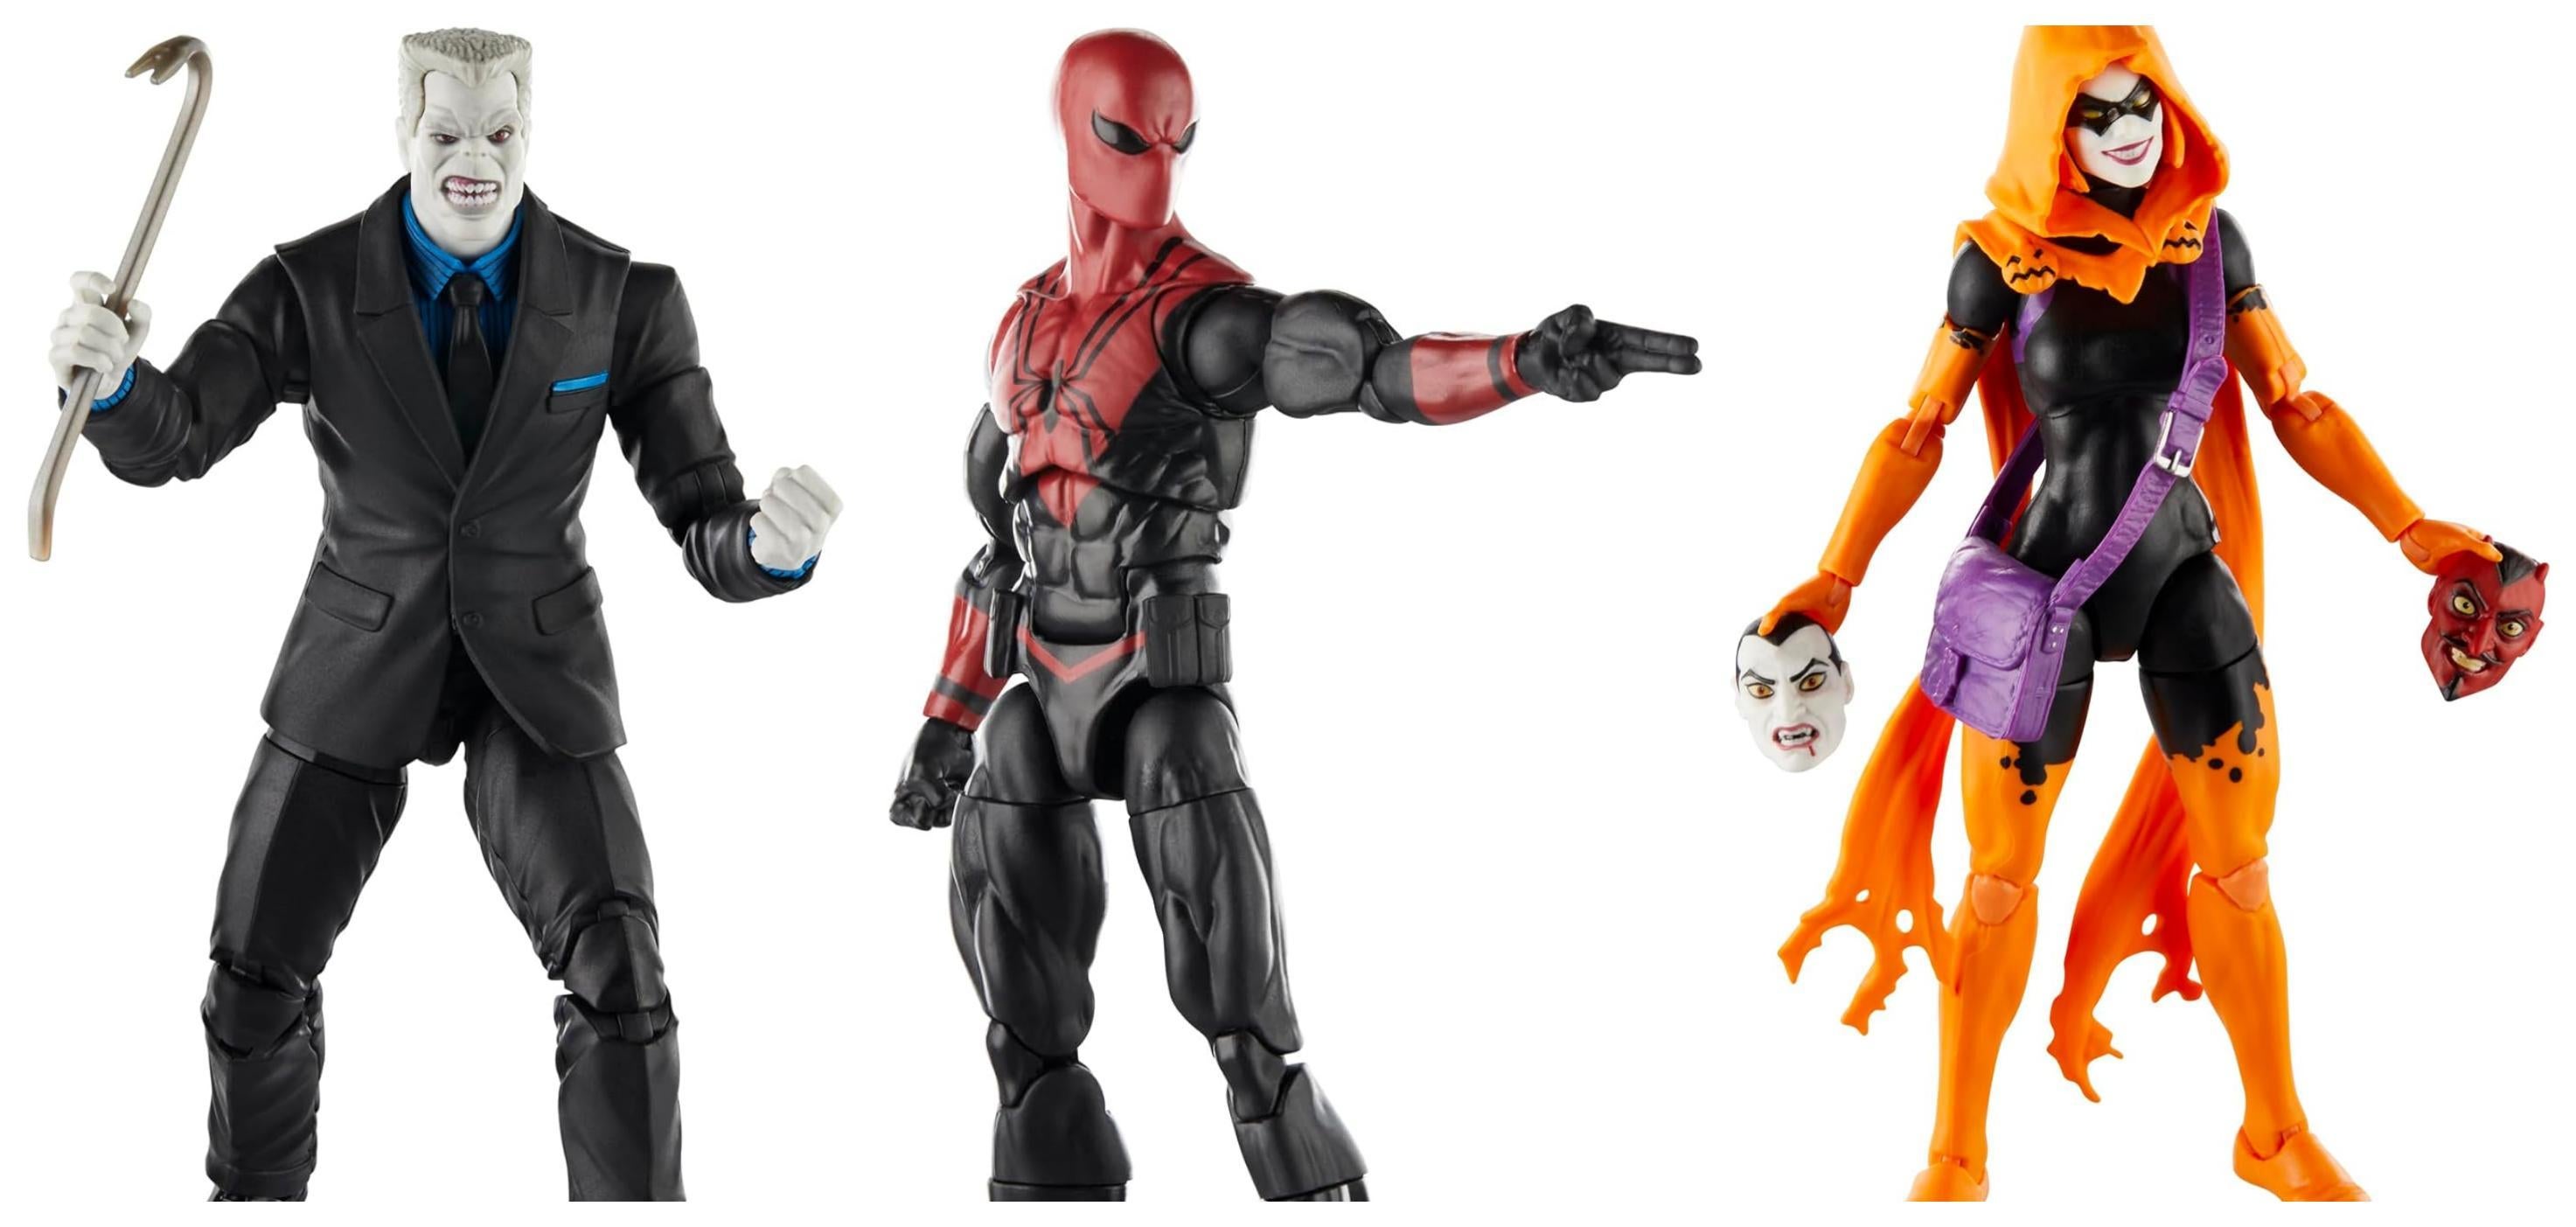 Pre-Order Details for Marvel Legends Hasbro 10/27 and London Comic Con